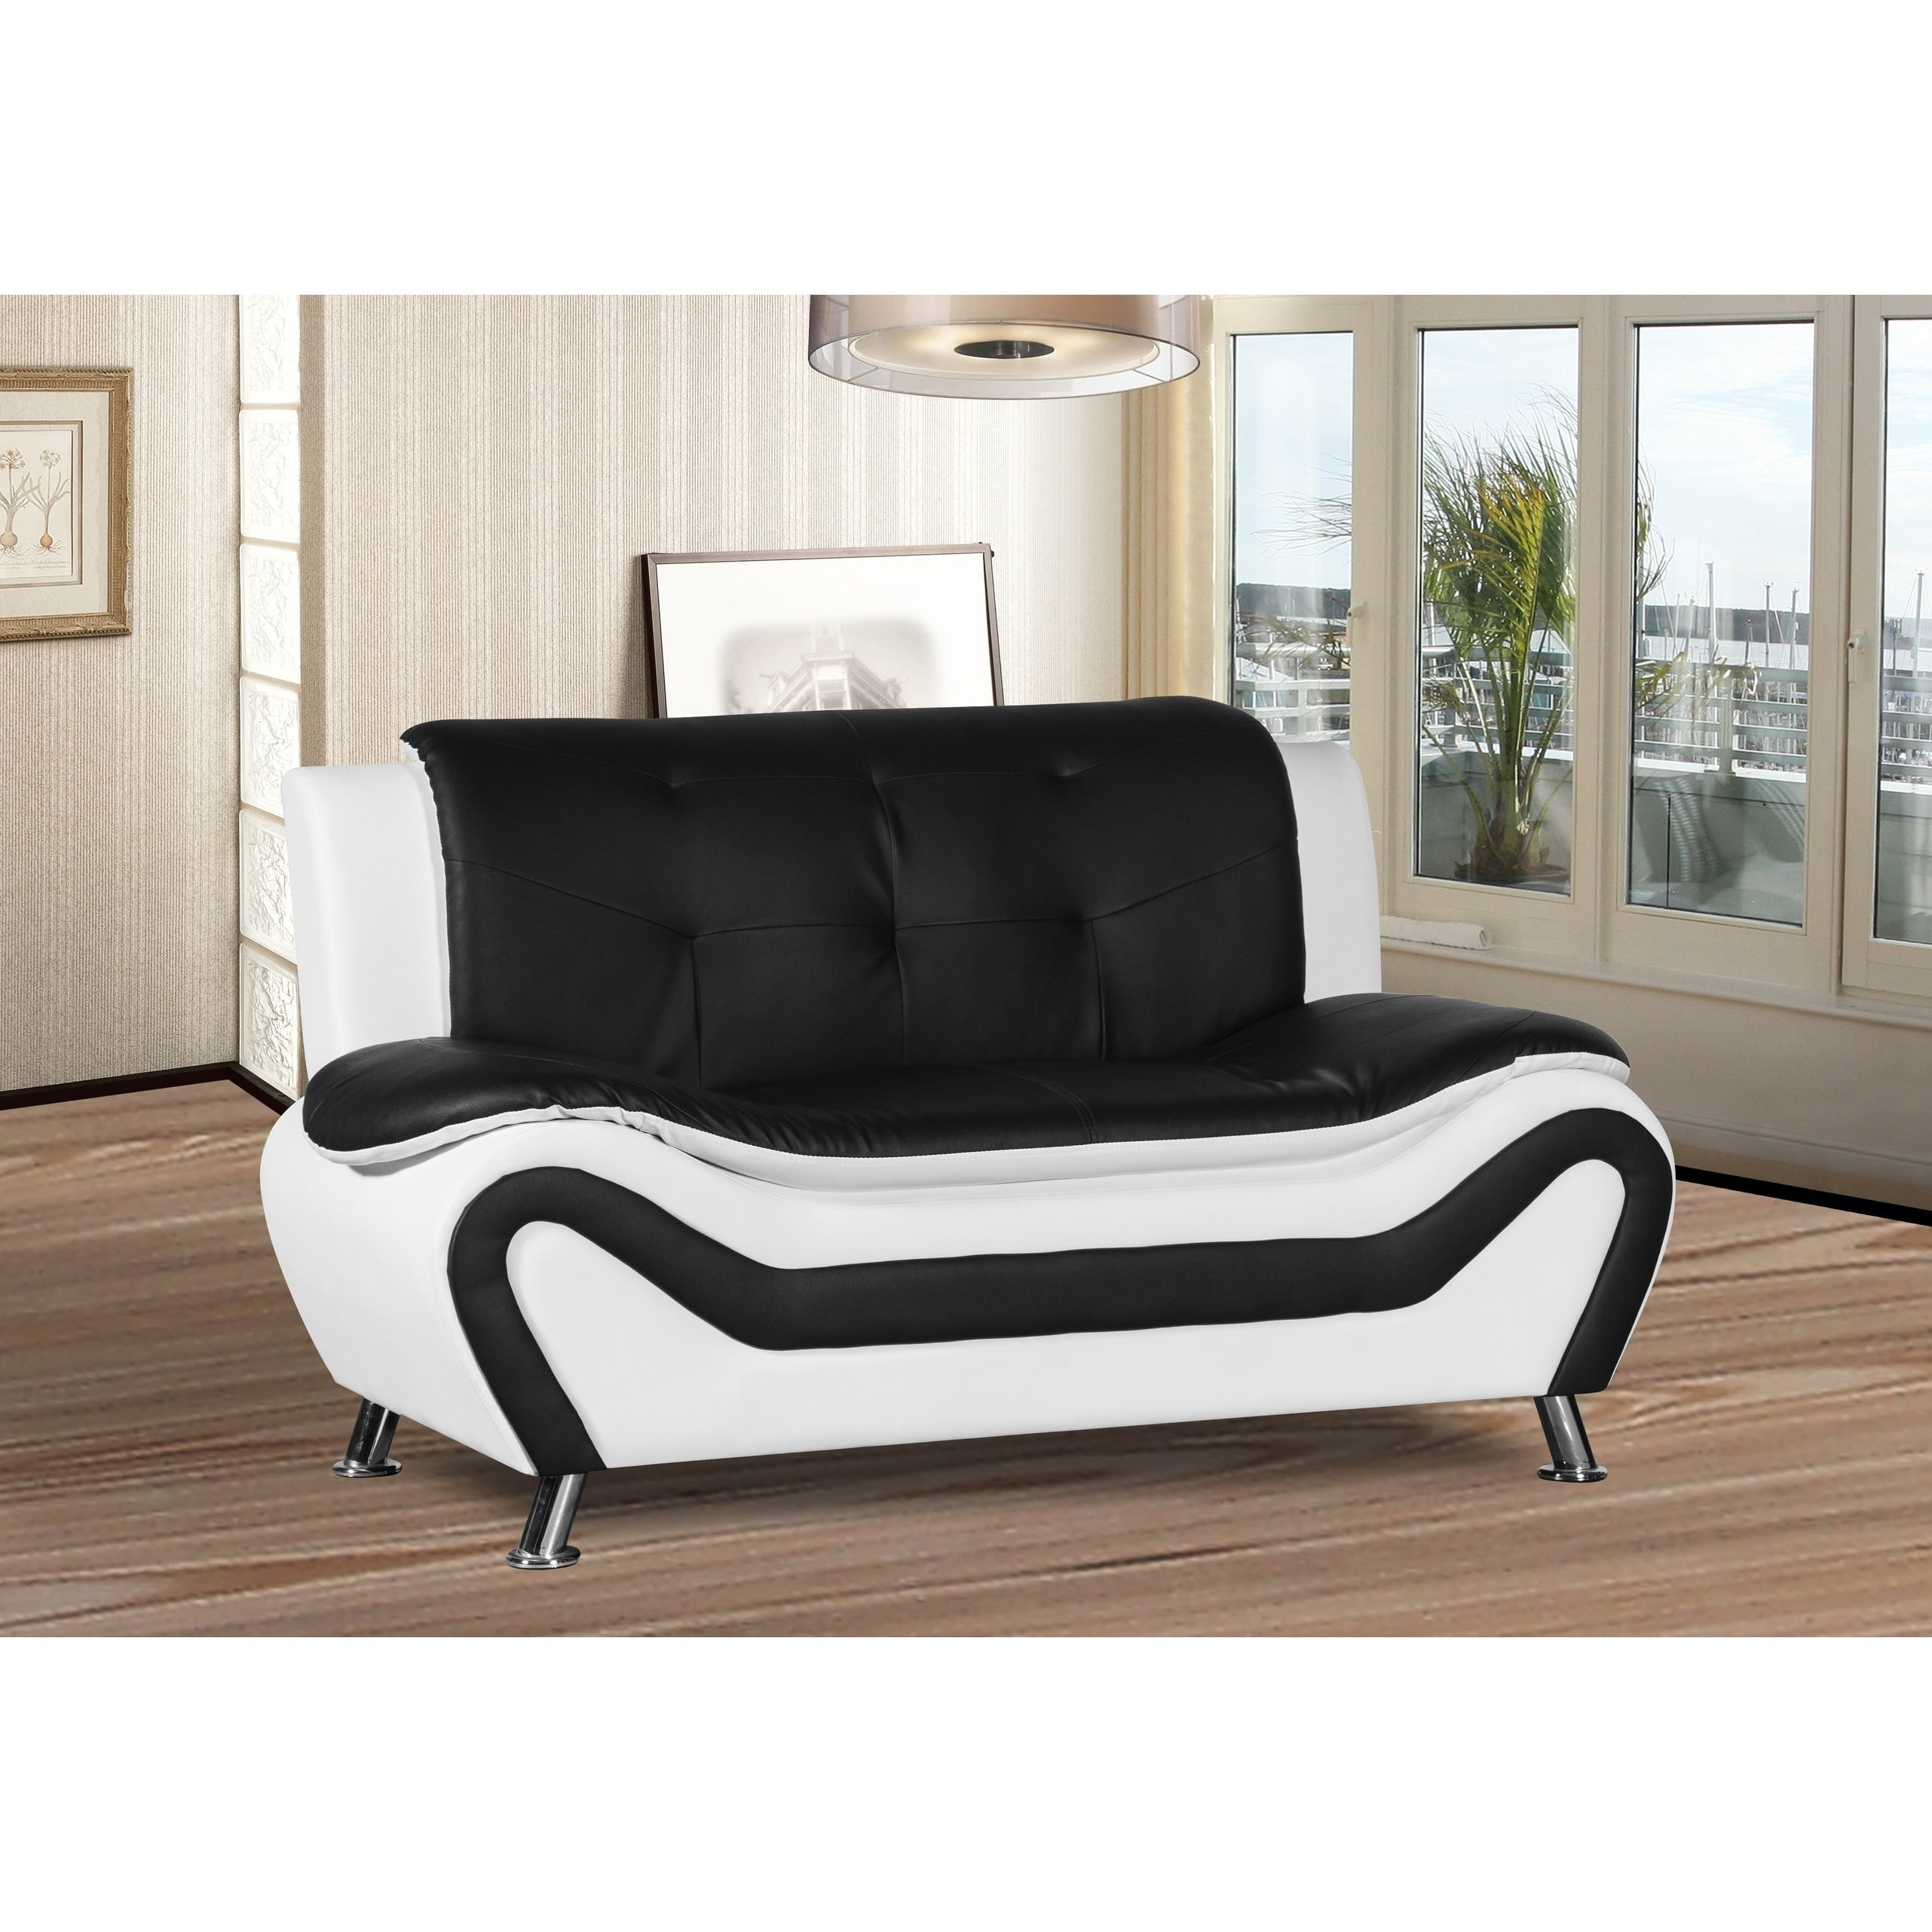 Jasmine Faux Leather Living Room, White Faux Leather Loveseat